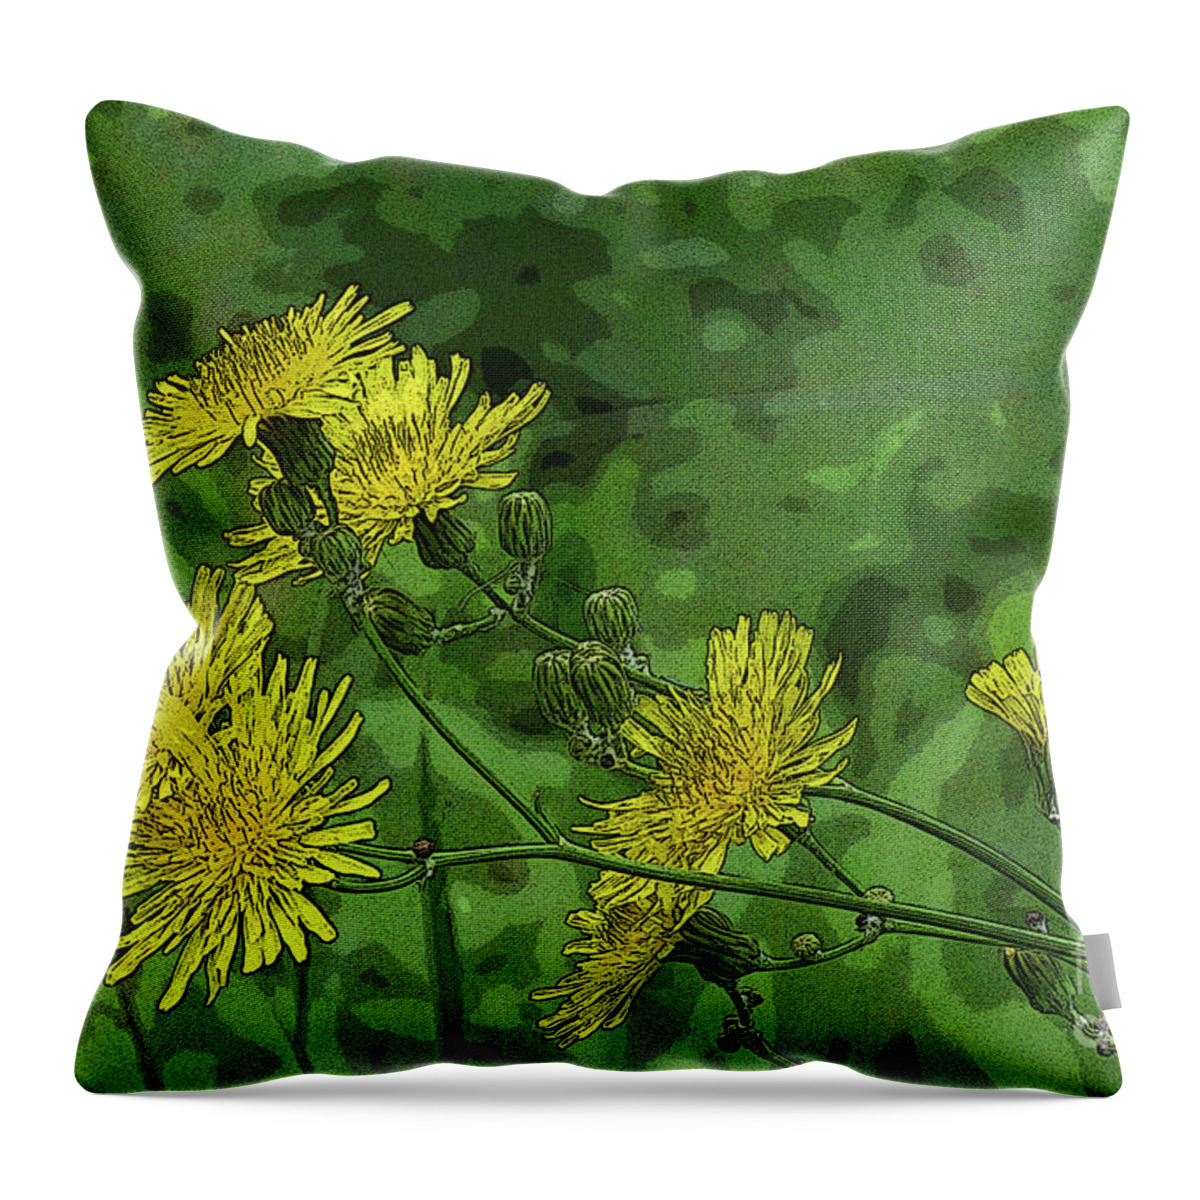 Canada Throw Pillow featuring the digital art Swaying Dandelions by Mary Mikawoz